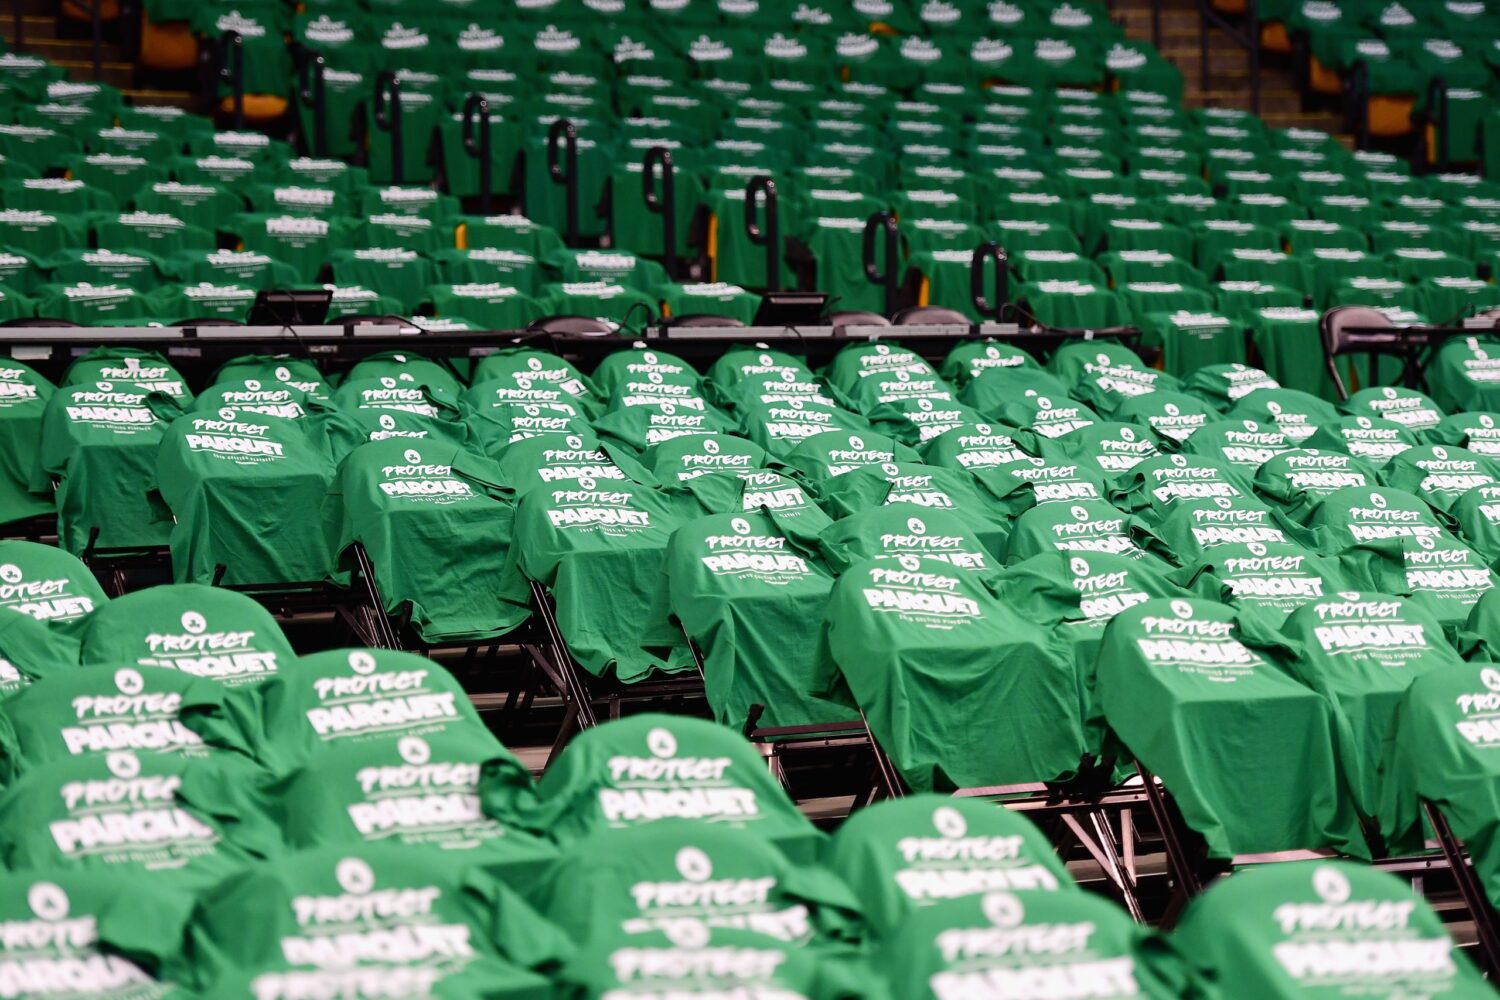 BOSTON, MA - MAY 23:  T-shirts are seen draped on seats prior to Game Five of the 2018 NBA Eastern Conference Finals between the Cleveland Cavaliers and the Boston Celtics at TD Garden on May 23, 2018 in Boston, Massachusetts. NOTE TO USER: User expressly acknowledges and agrees that, by downloading and or using this photograph, User is consenting to the terms and conditions of the Getty Images License Agreement.  (Photo by Adam Glanzman/Getty Images)